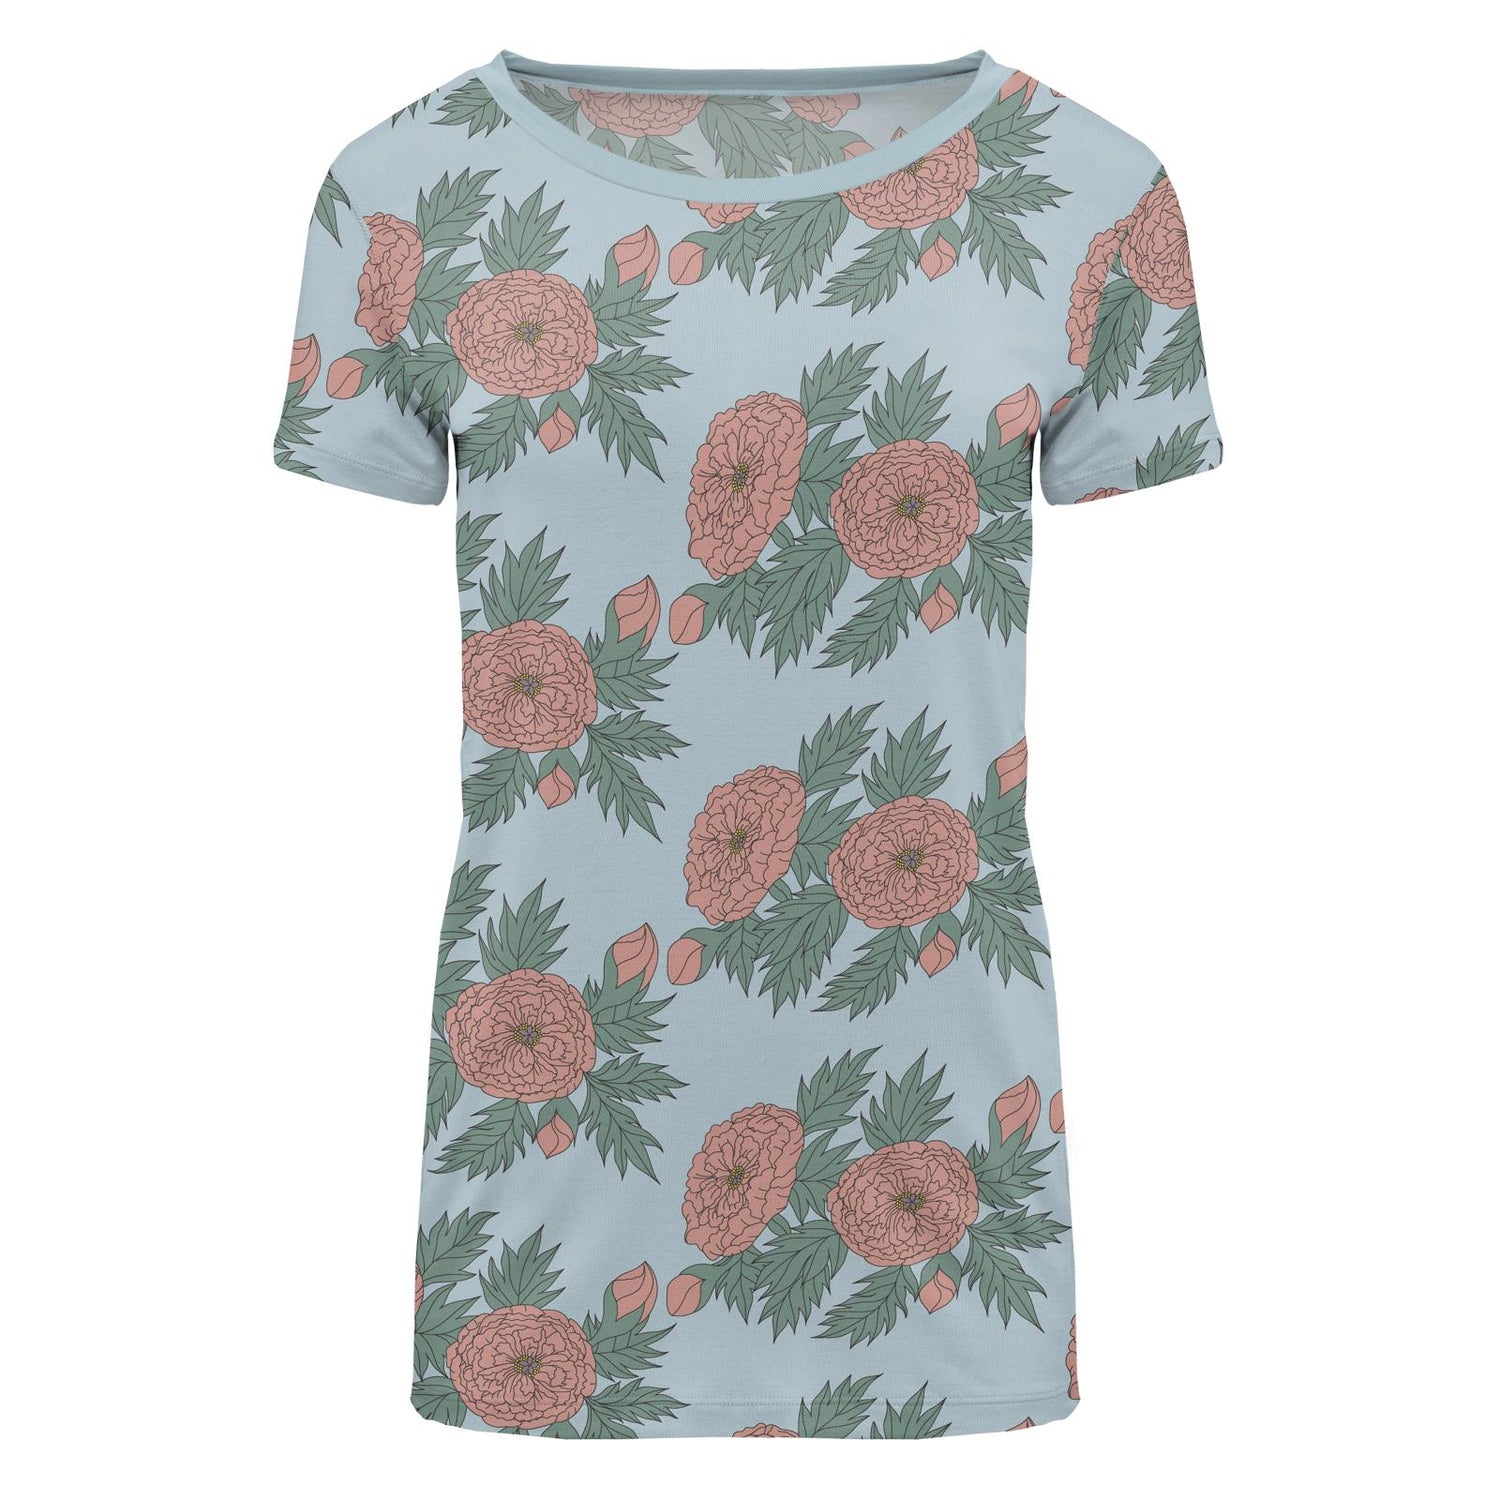 Women's Print Short Sleeve Relaxed Tee in Spring Sky Floral